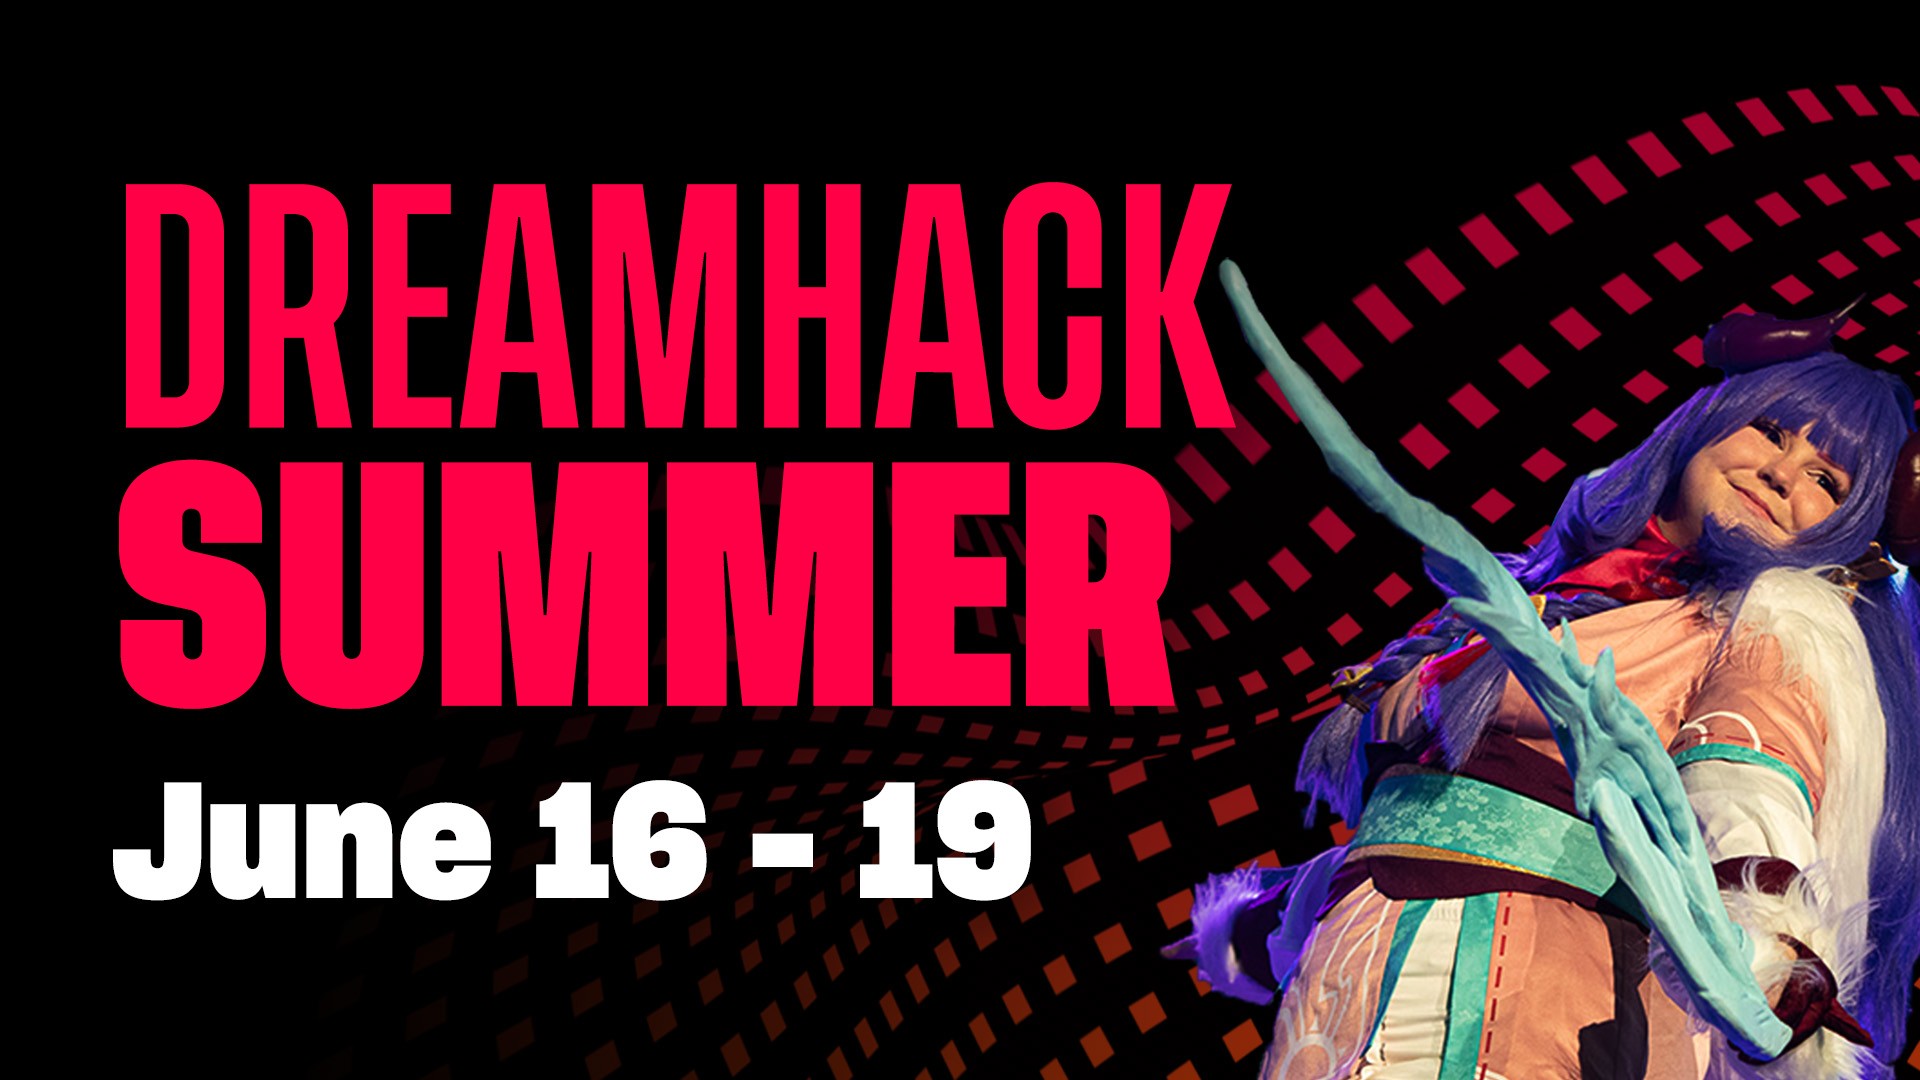 During DreamHack in Jönköping, players will have access to CS2